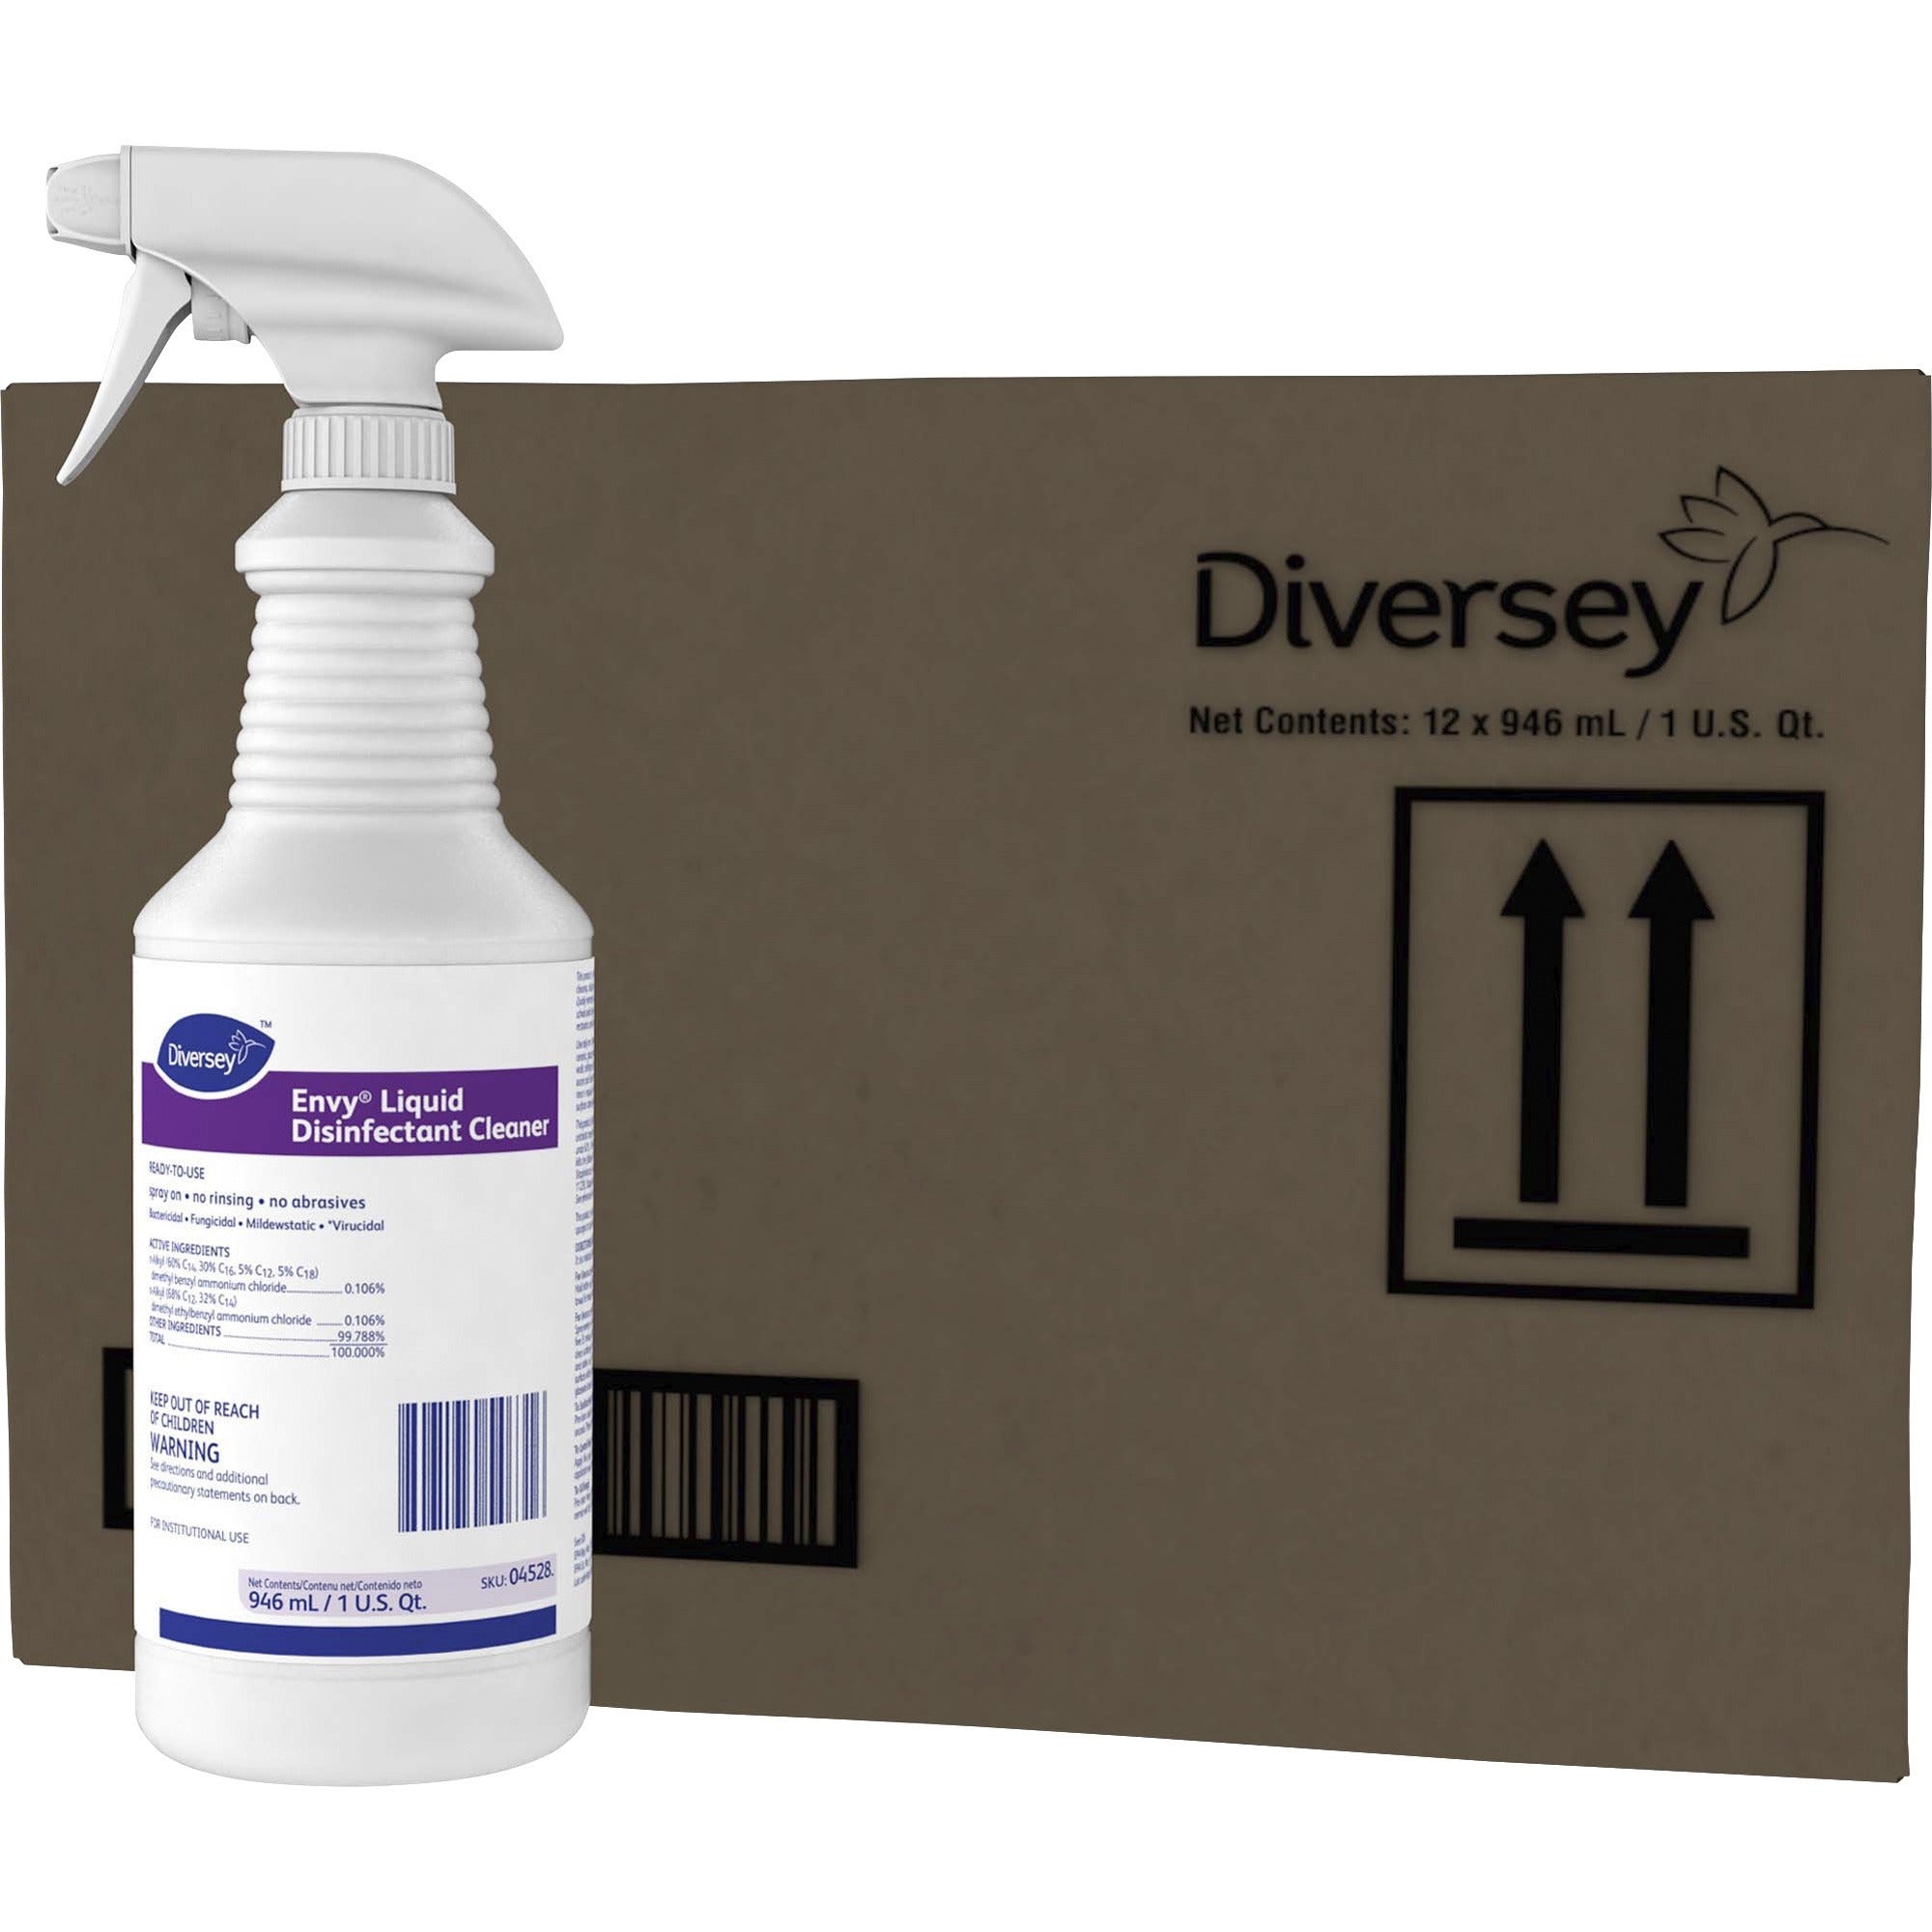 diversey-envy-liquid-disinfectant-cleaner-ready-to-use-32-fl-oz-1-quart-lavender-ammonia-scent-1-each-color-free-disinfectant-virucidal-bactericide-fungicide-mildewstatic-rinse-free-non-abrasive-deodorize-clear_dvo04528 - 1